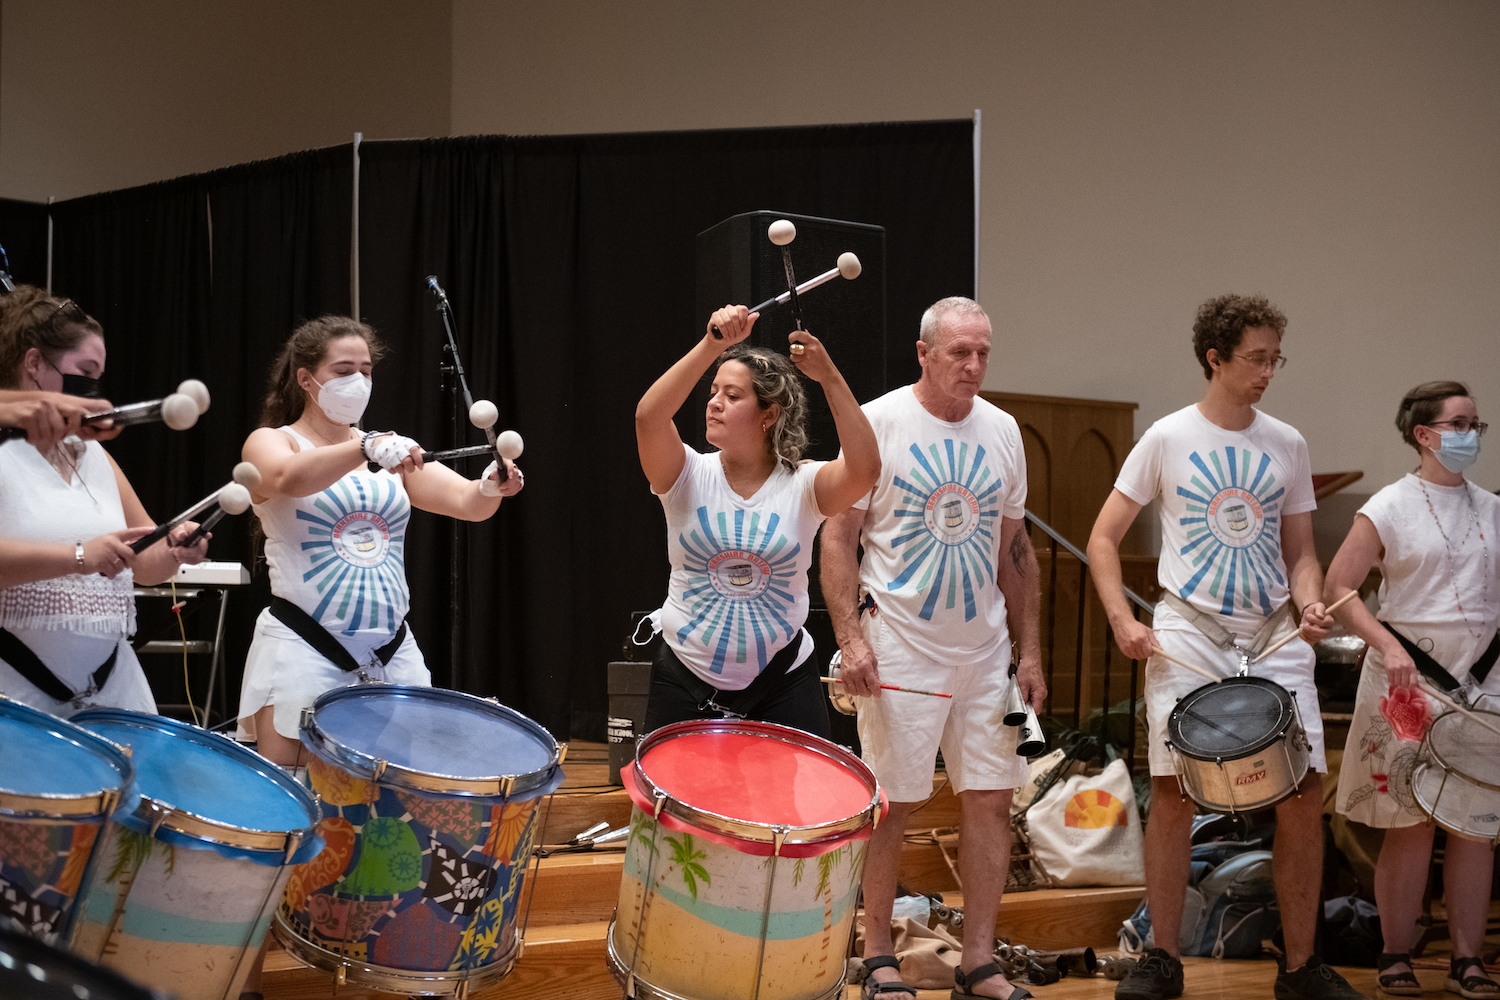 A group of six people stand, each playing their own drum. The woman in the middle holds two drumsticks above her head.